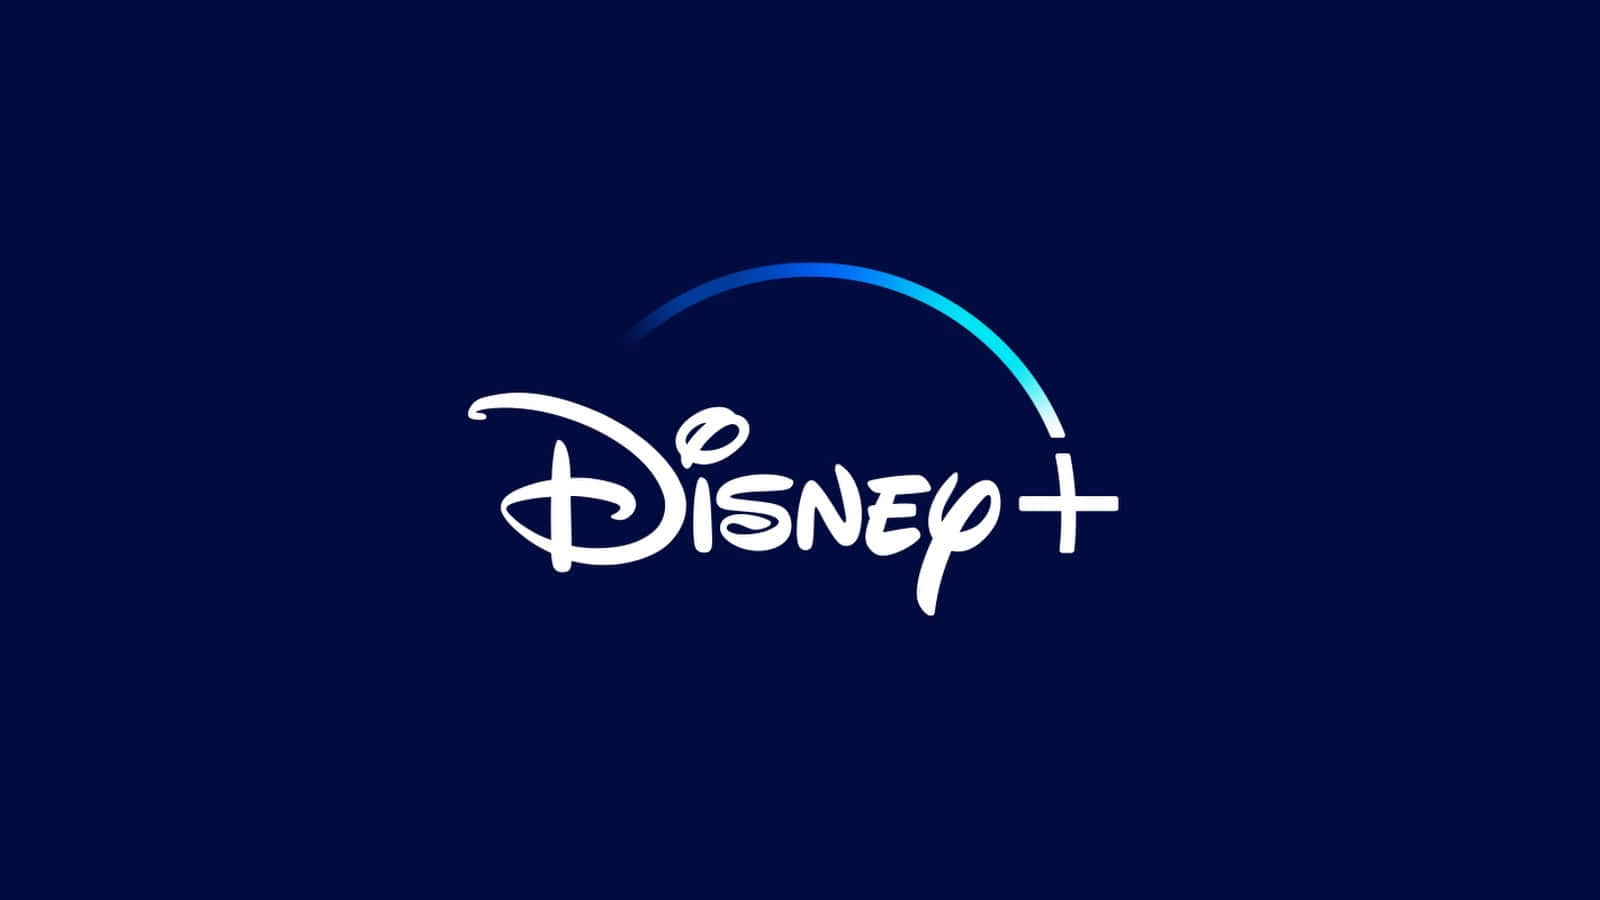 Disney Plus: No More Unauthorized Password Sharing Allowed